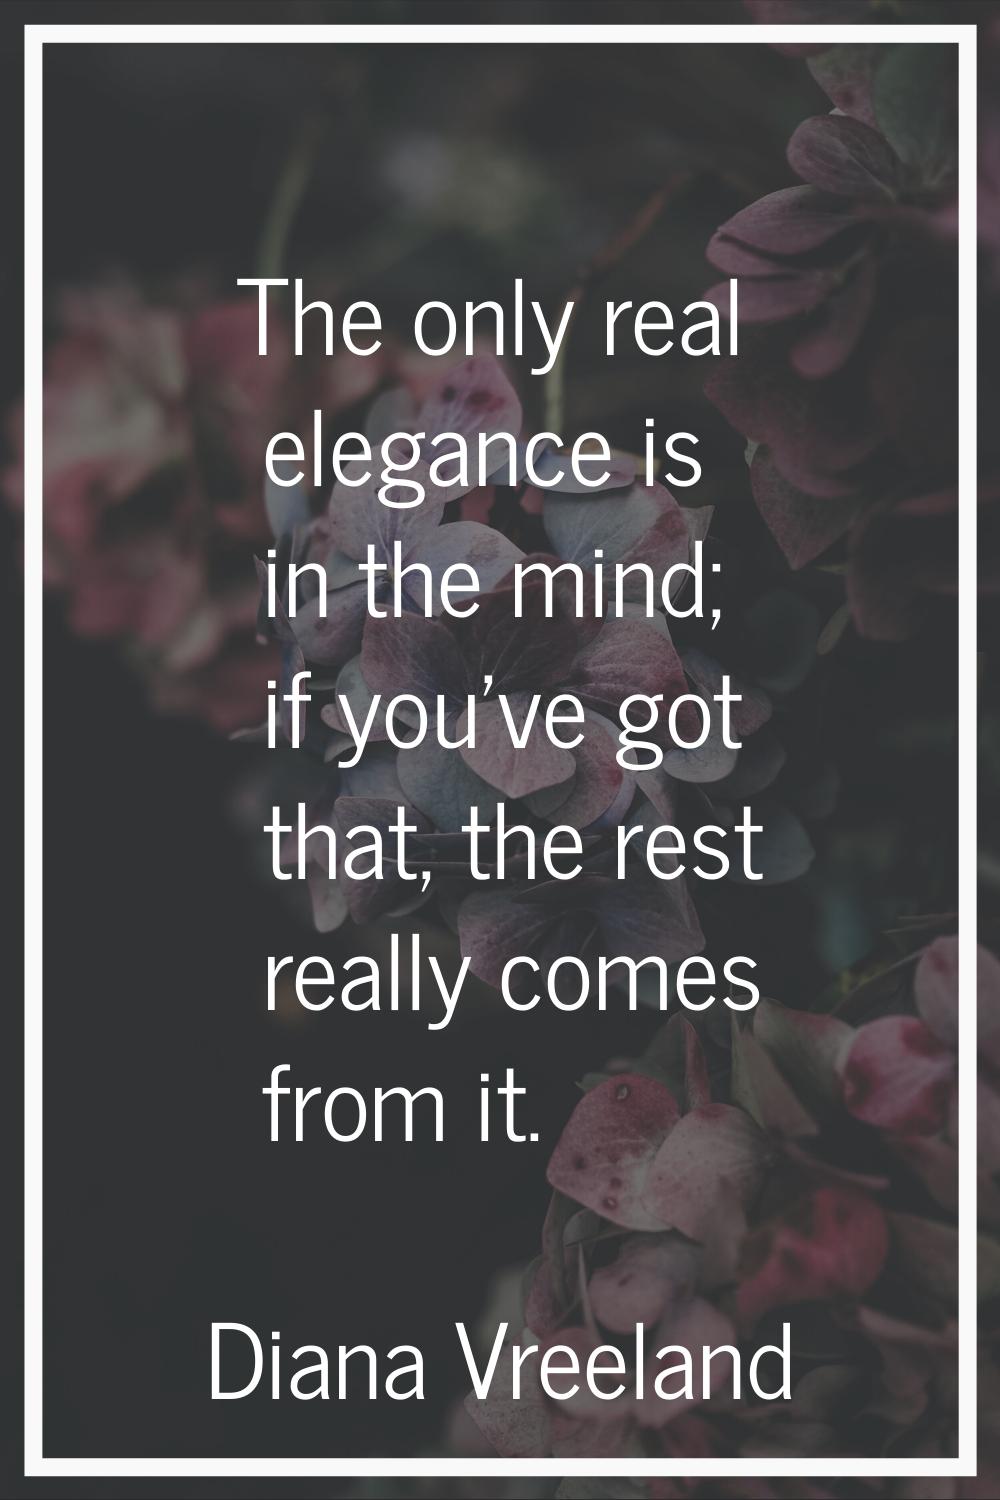 The only real elegance is in the mind; if you've got that, the rest really comes from it.